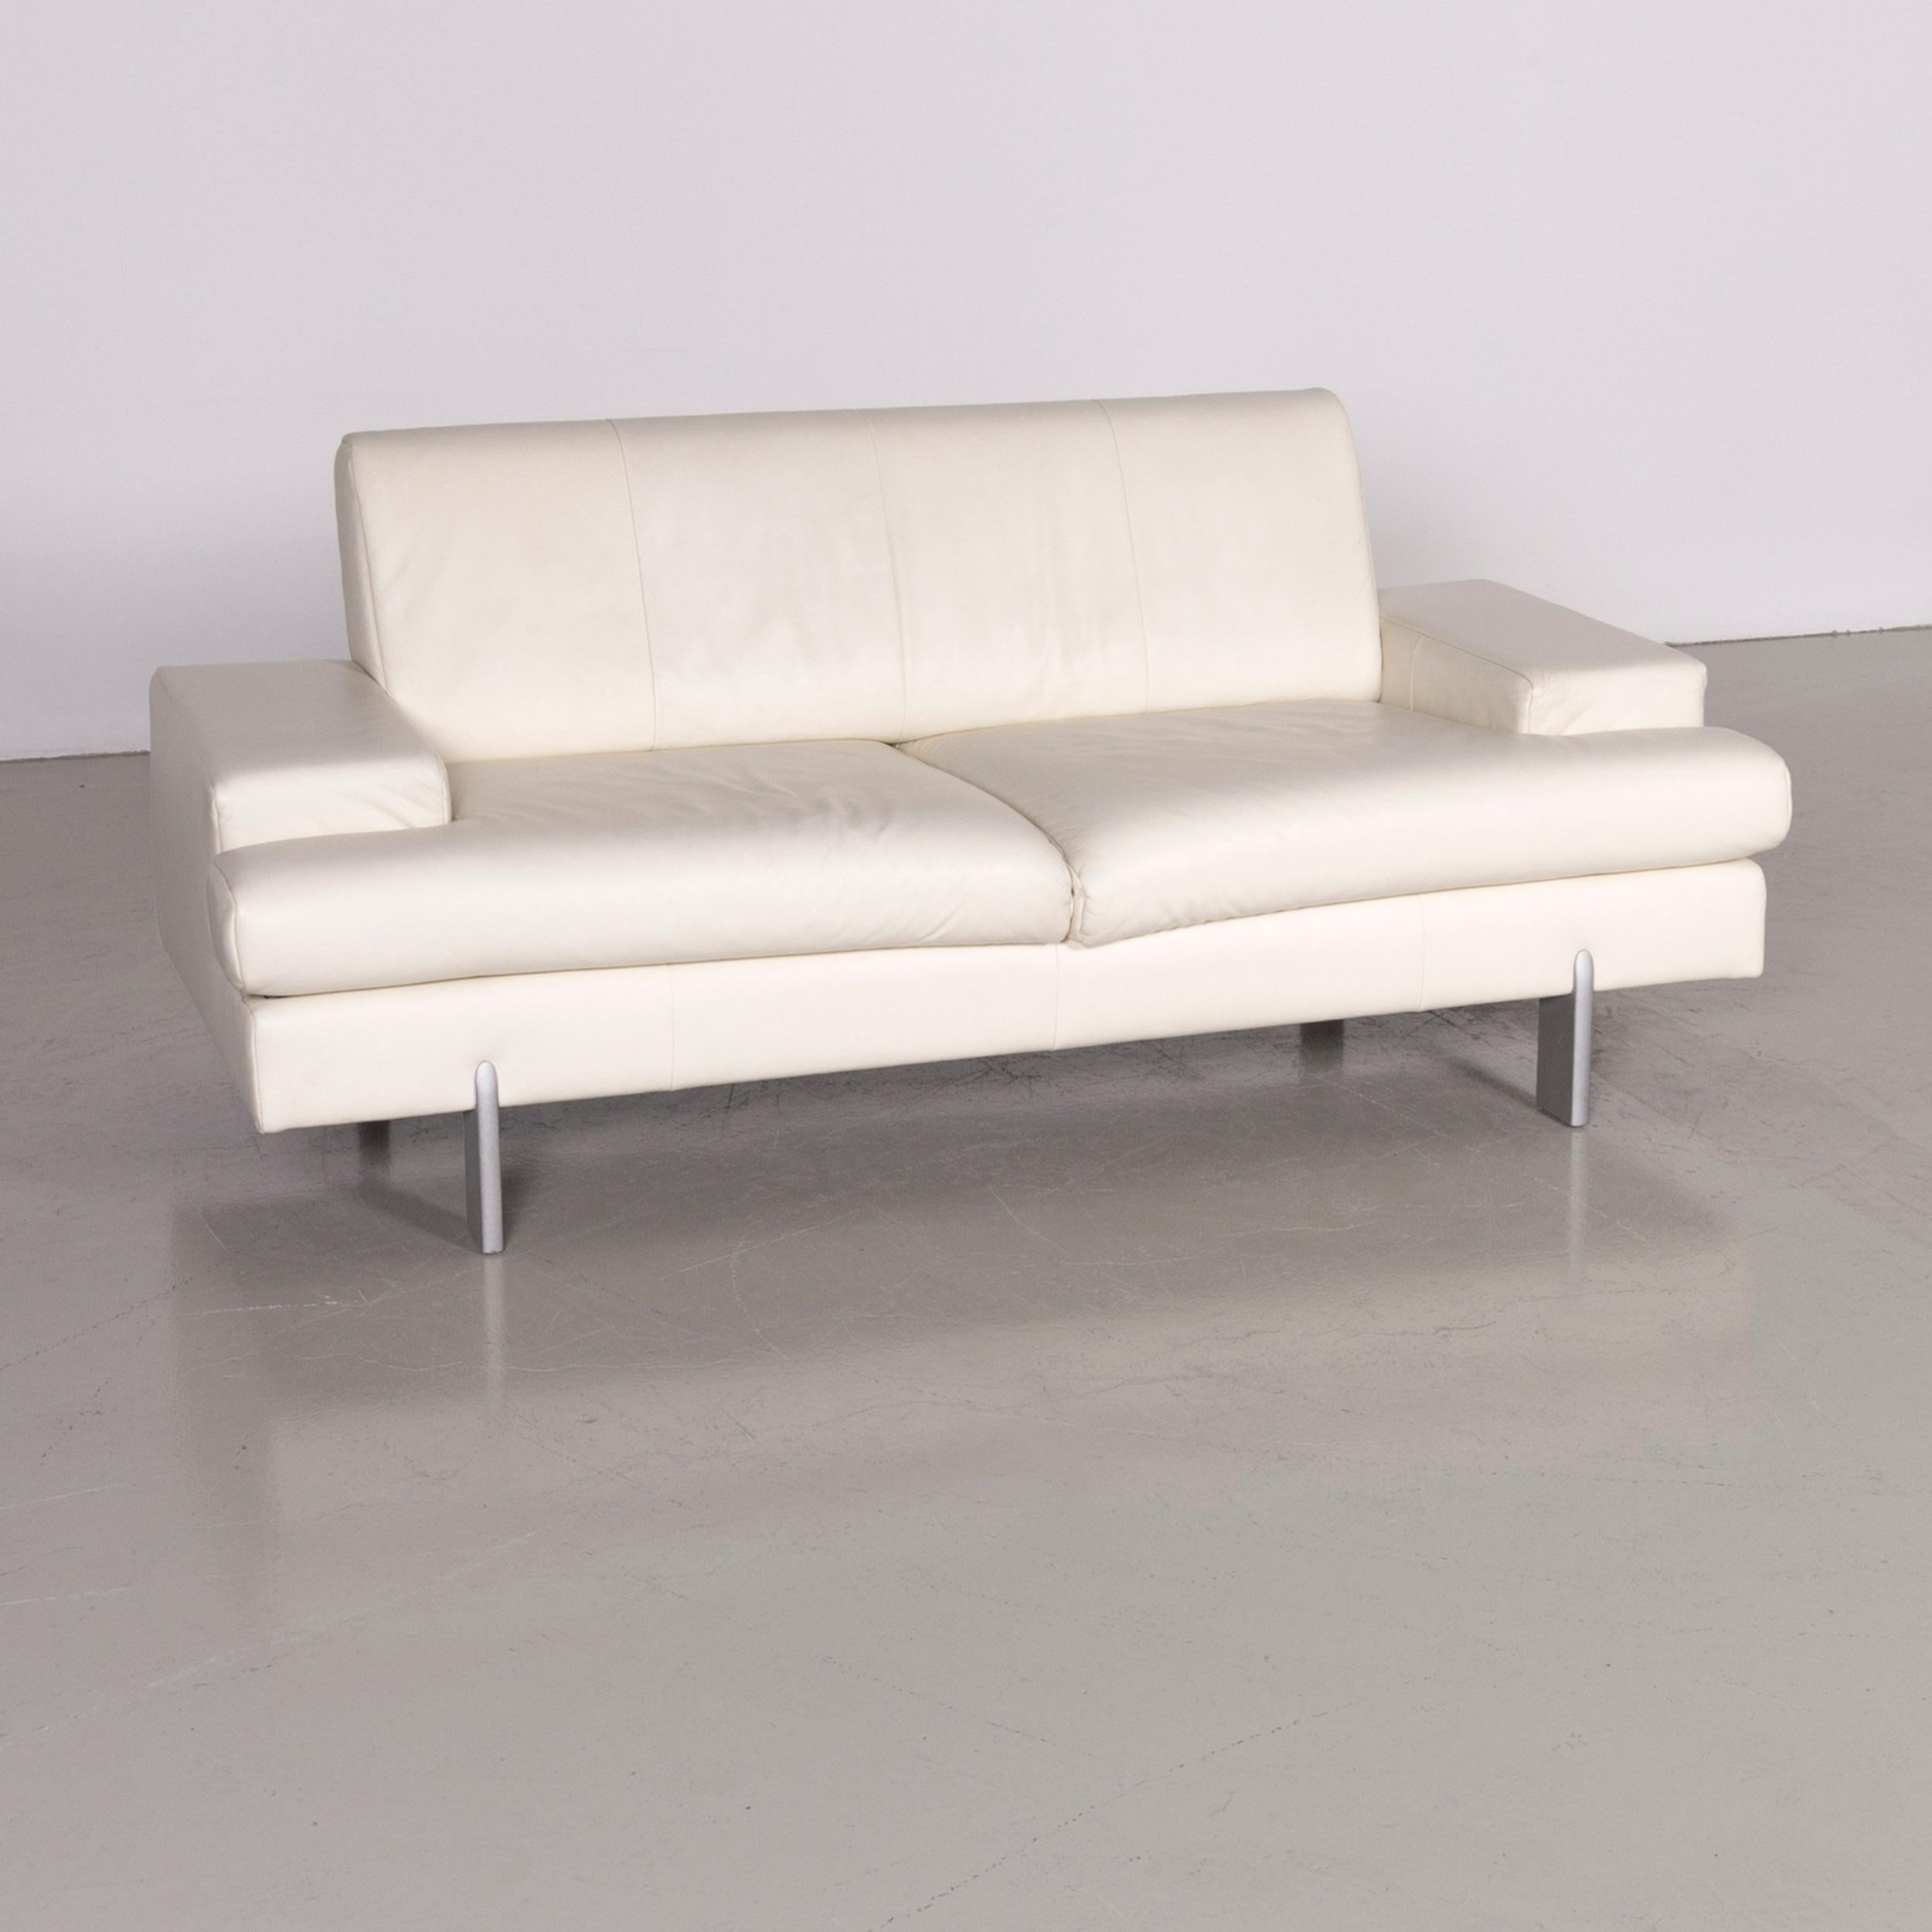 Rolf Benz designer leather sofa creme three-seat couch.